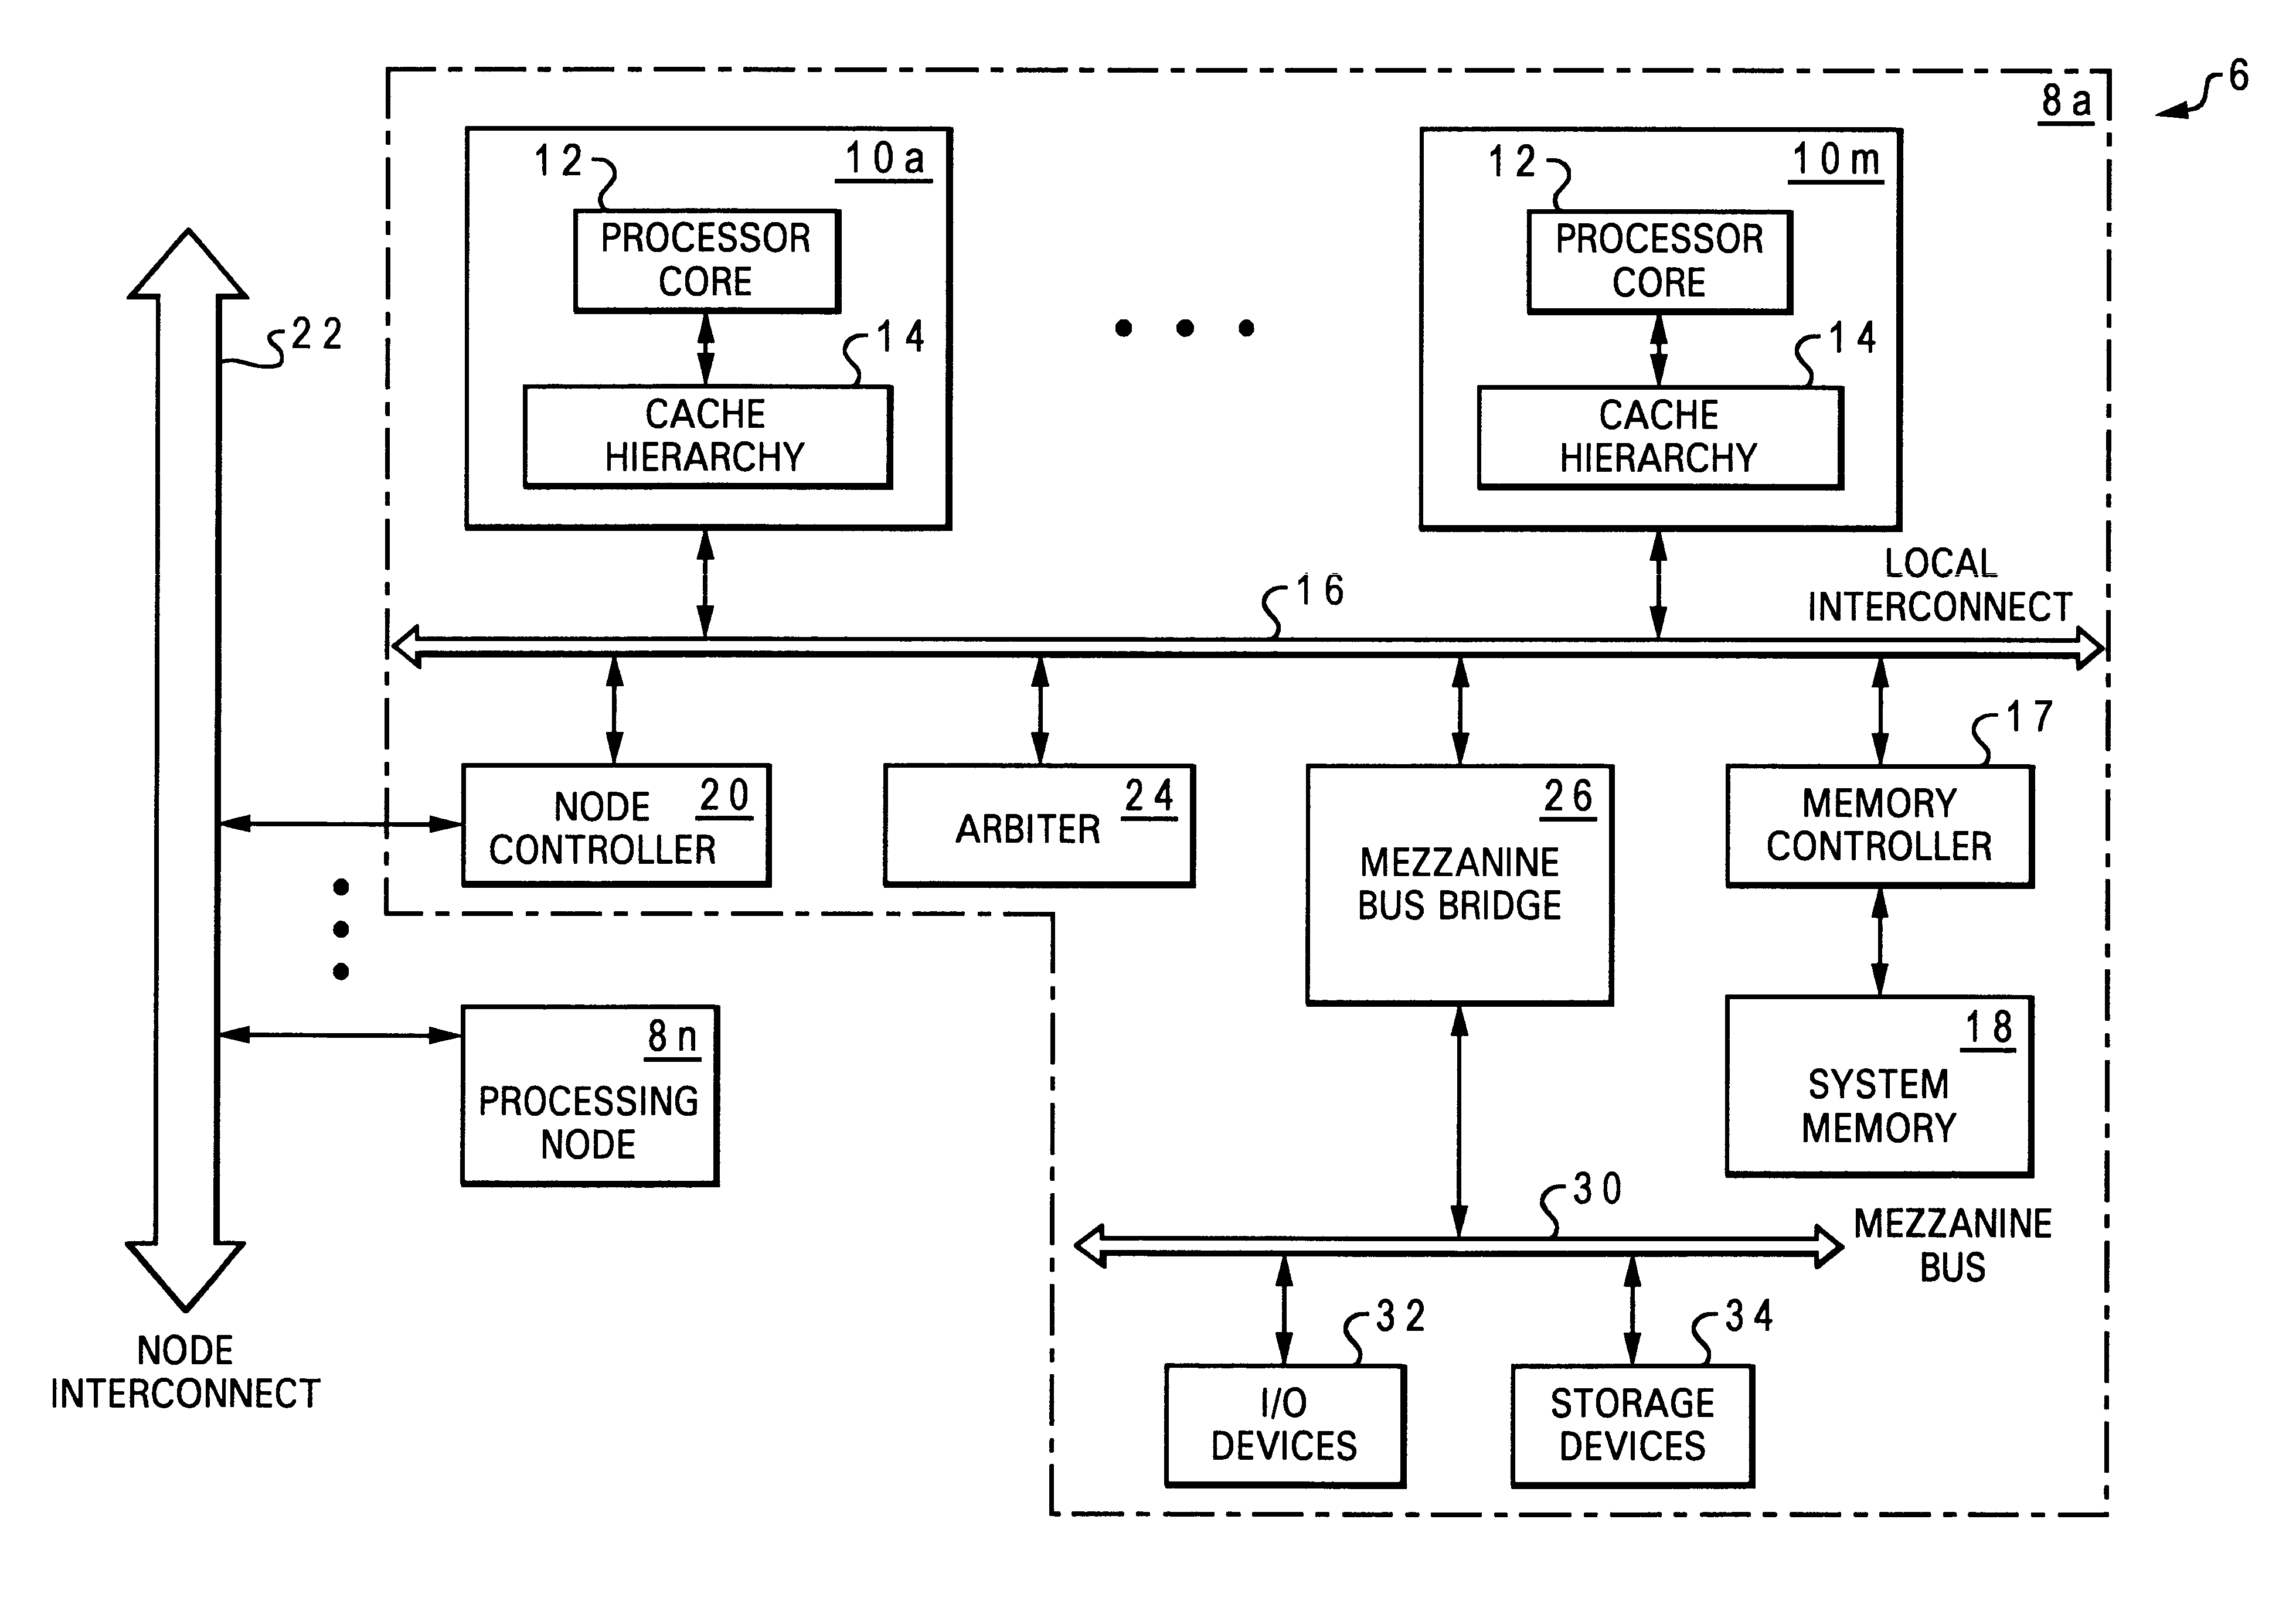 Non-uniform memory access (NUMA) data processing system that speculatively forwards a read request to a remote processing node